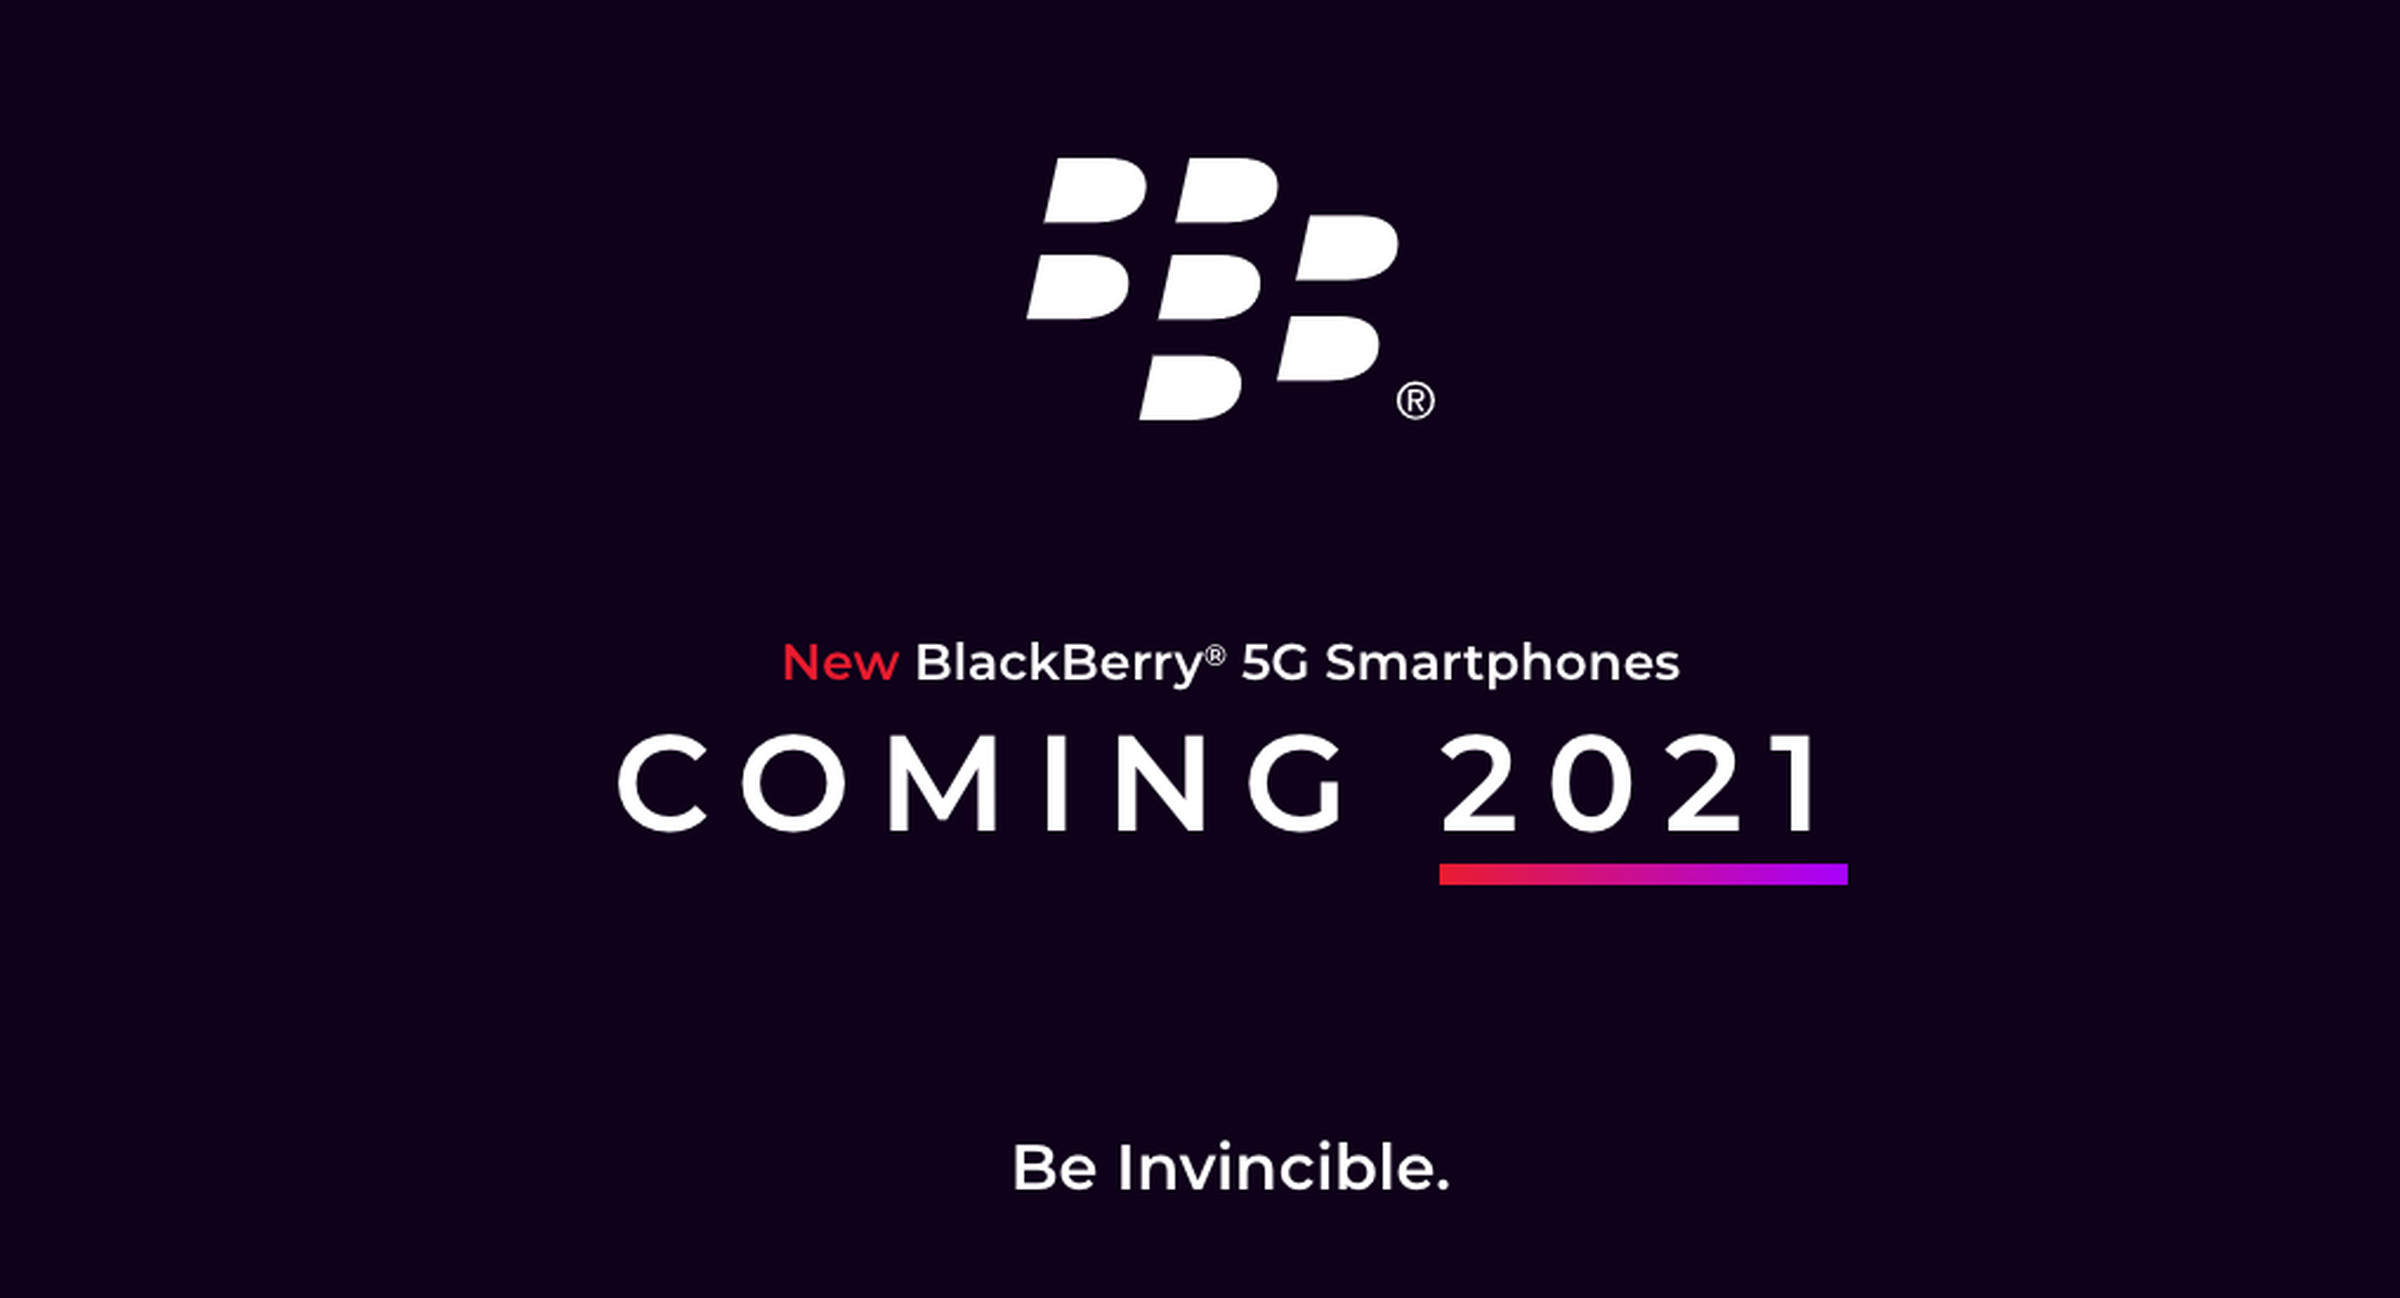 In fairness, “be invincible” is a good strapline for an apparently unkillable brand like BlackBerry.